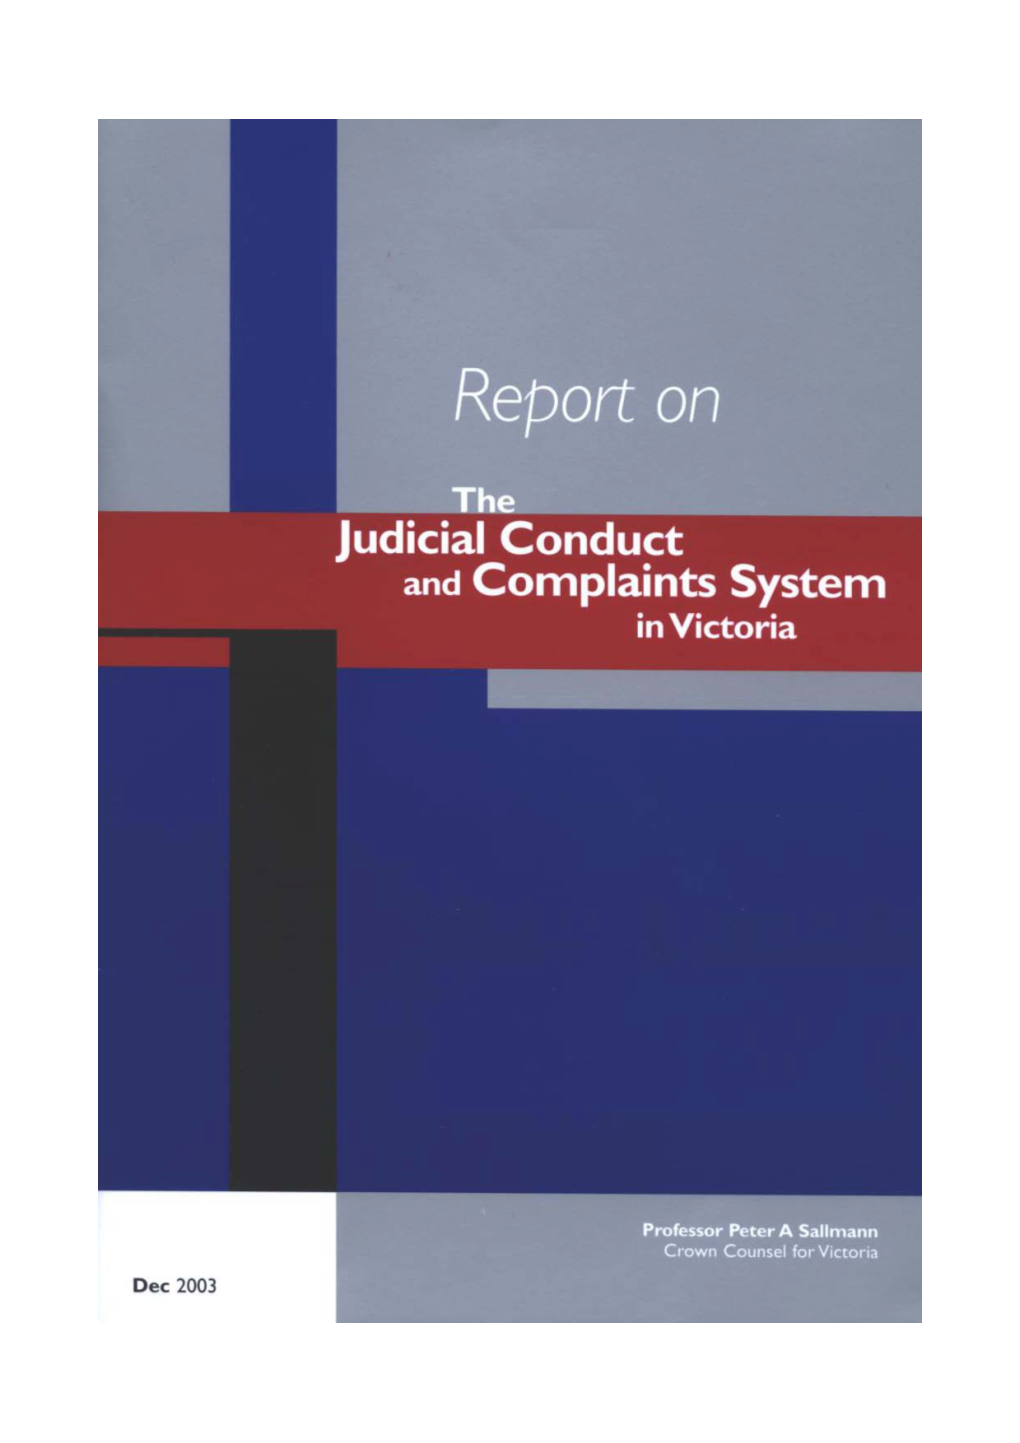 Report on the Judicial Conduct and Complaints System in Victoria